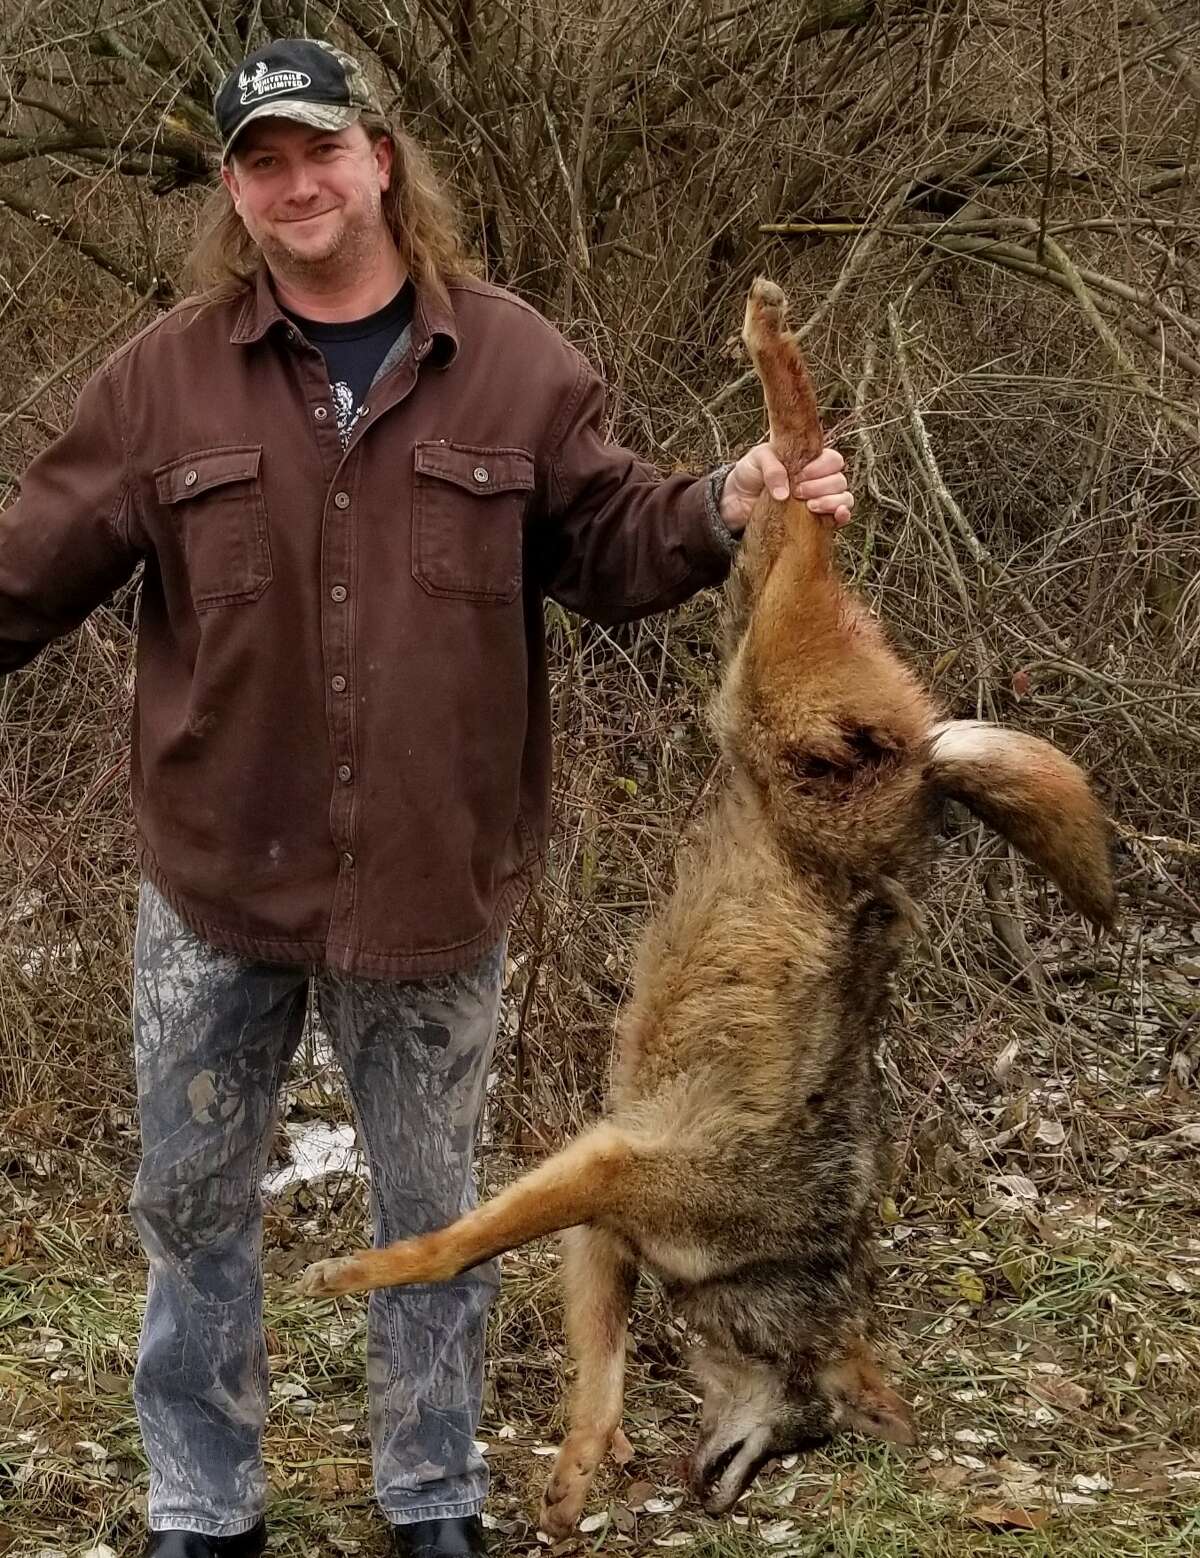 Don Burnette of Cass City shot this large male coyote during a midday "coyote drive" with a couple other hunters during a snowless January day two years ago. Burnette used a scoped .204 Ruger bolt-action to drop the running coyote, flushed out of a fencerow at 100 yards..